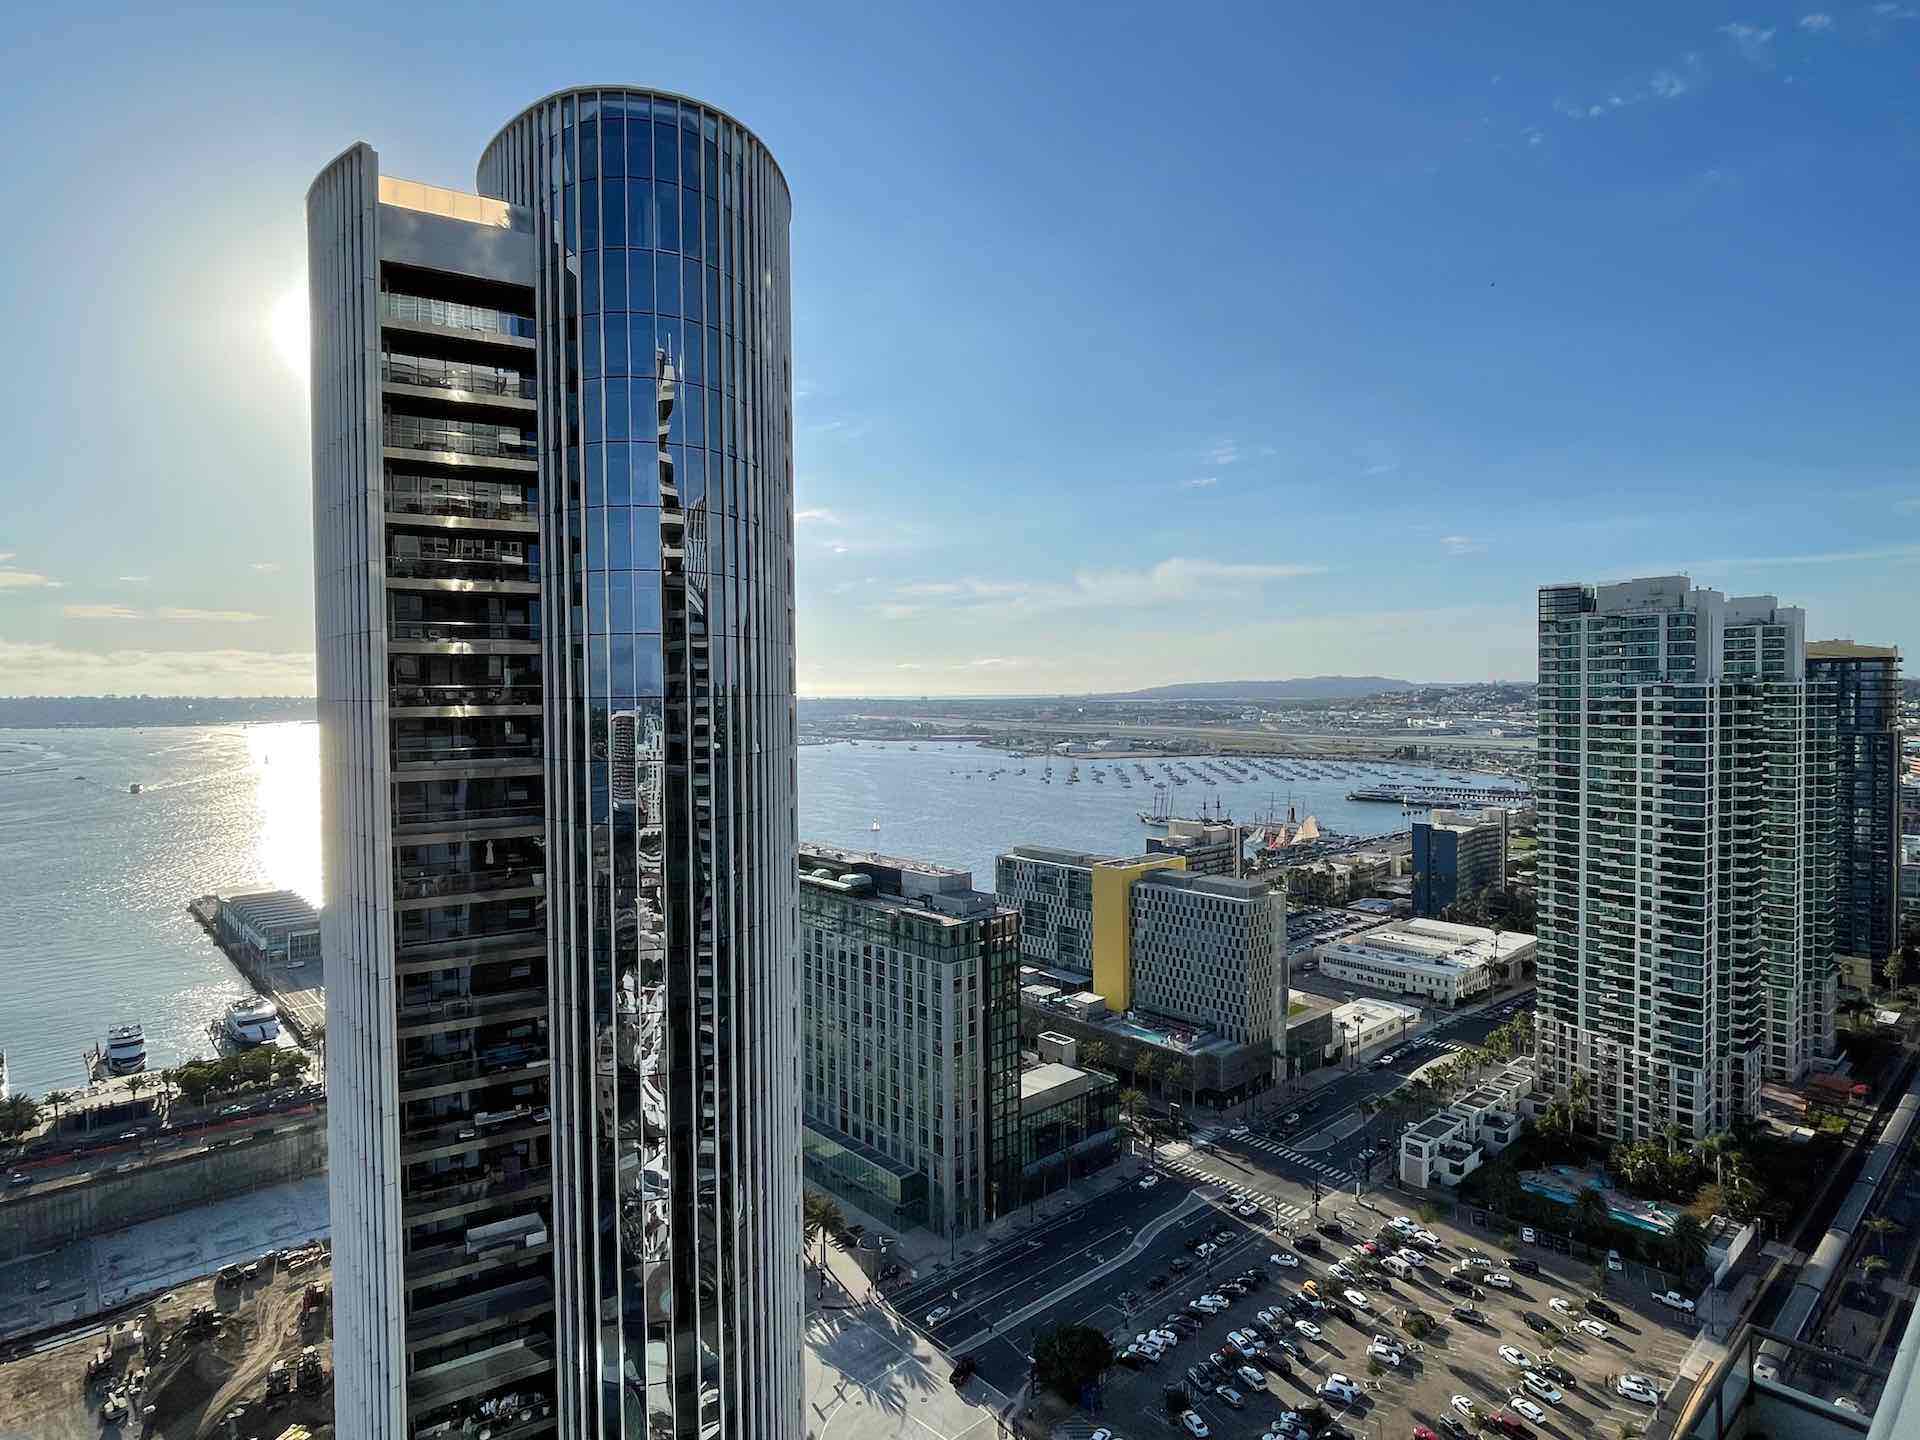 Pacific Gate condo tower in San Diego